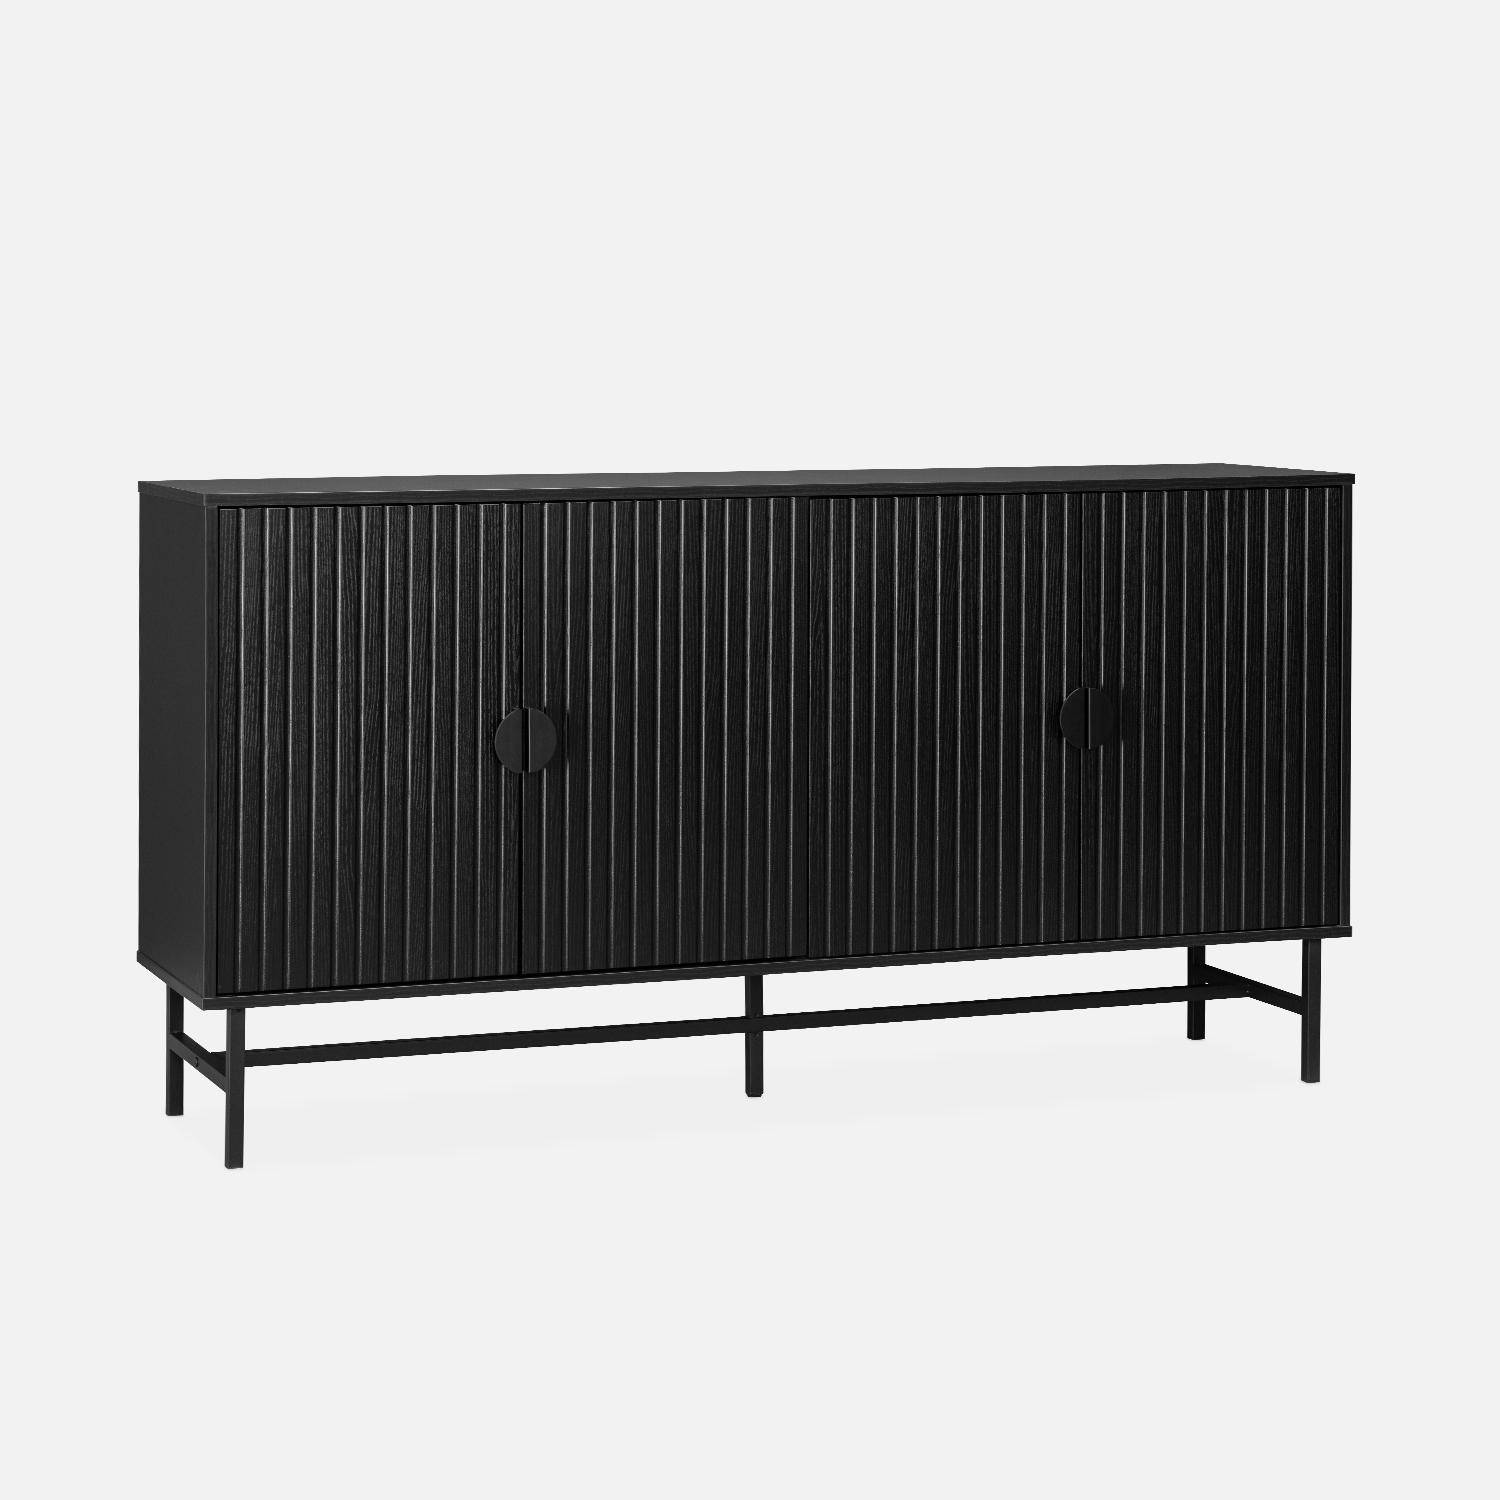 Sideboard cabinet with two doors and one shelf, ridged effect, industrial style, 157.5x39x83cm - Bazalt - Black Photo4